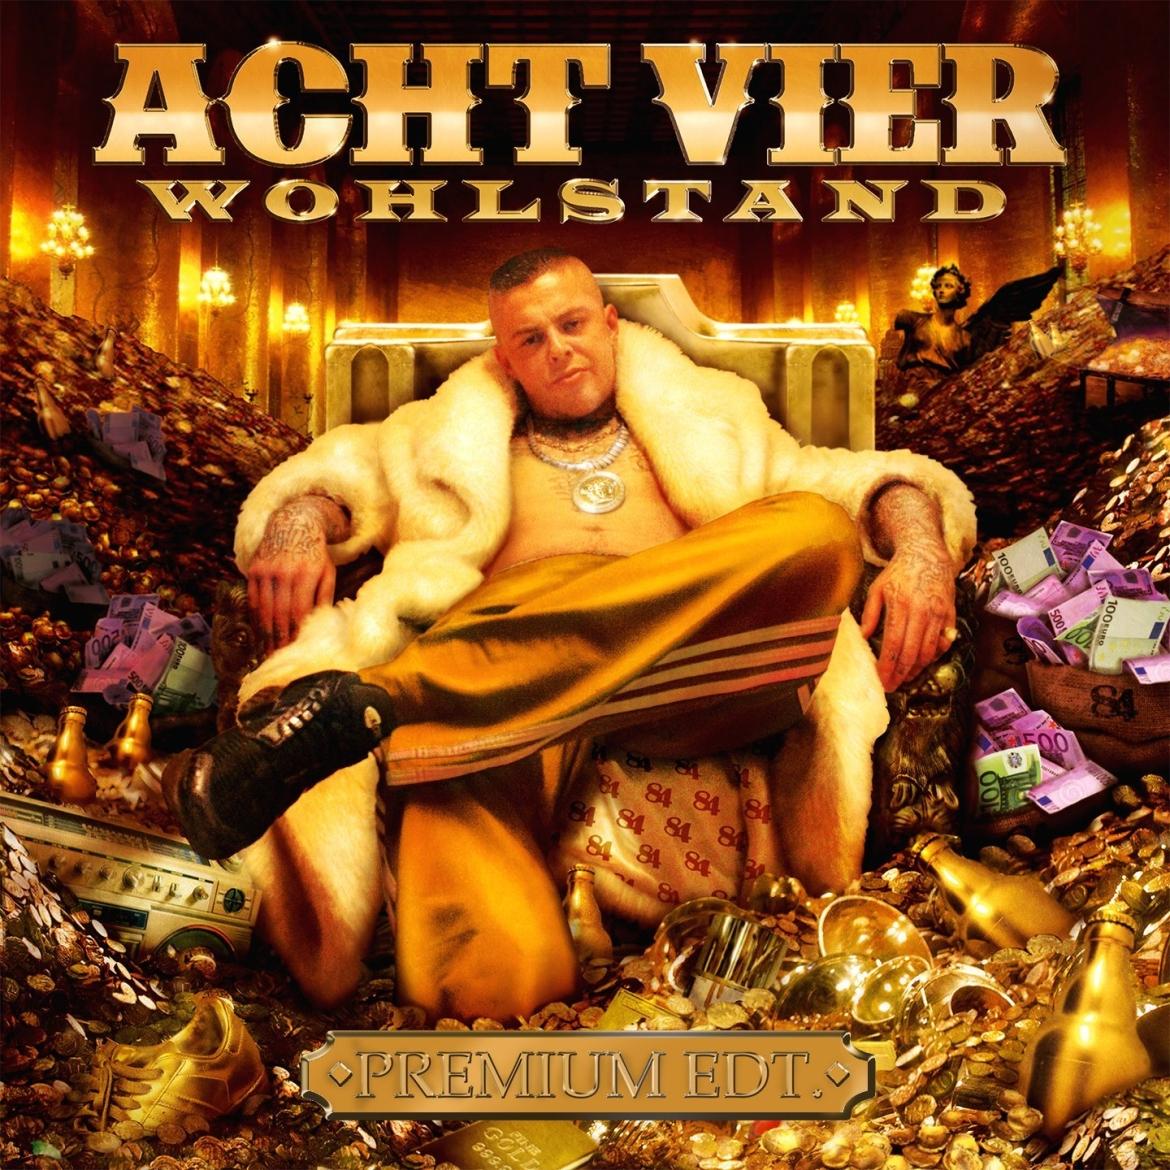 achtvier_cover_wohlstand_800_2014.jpg